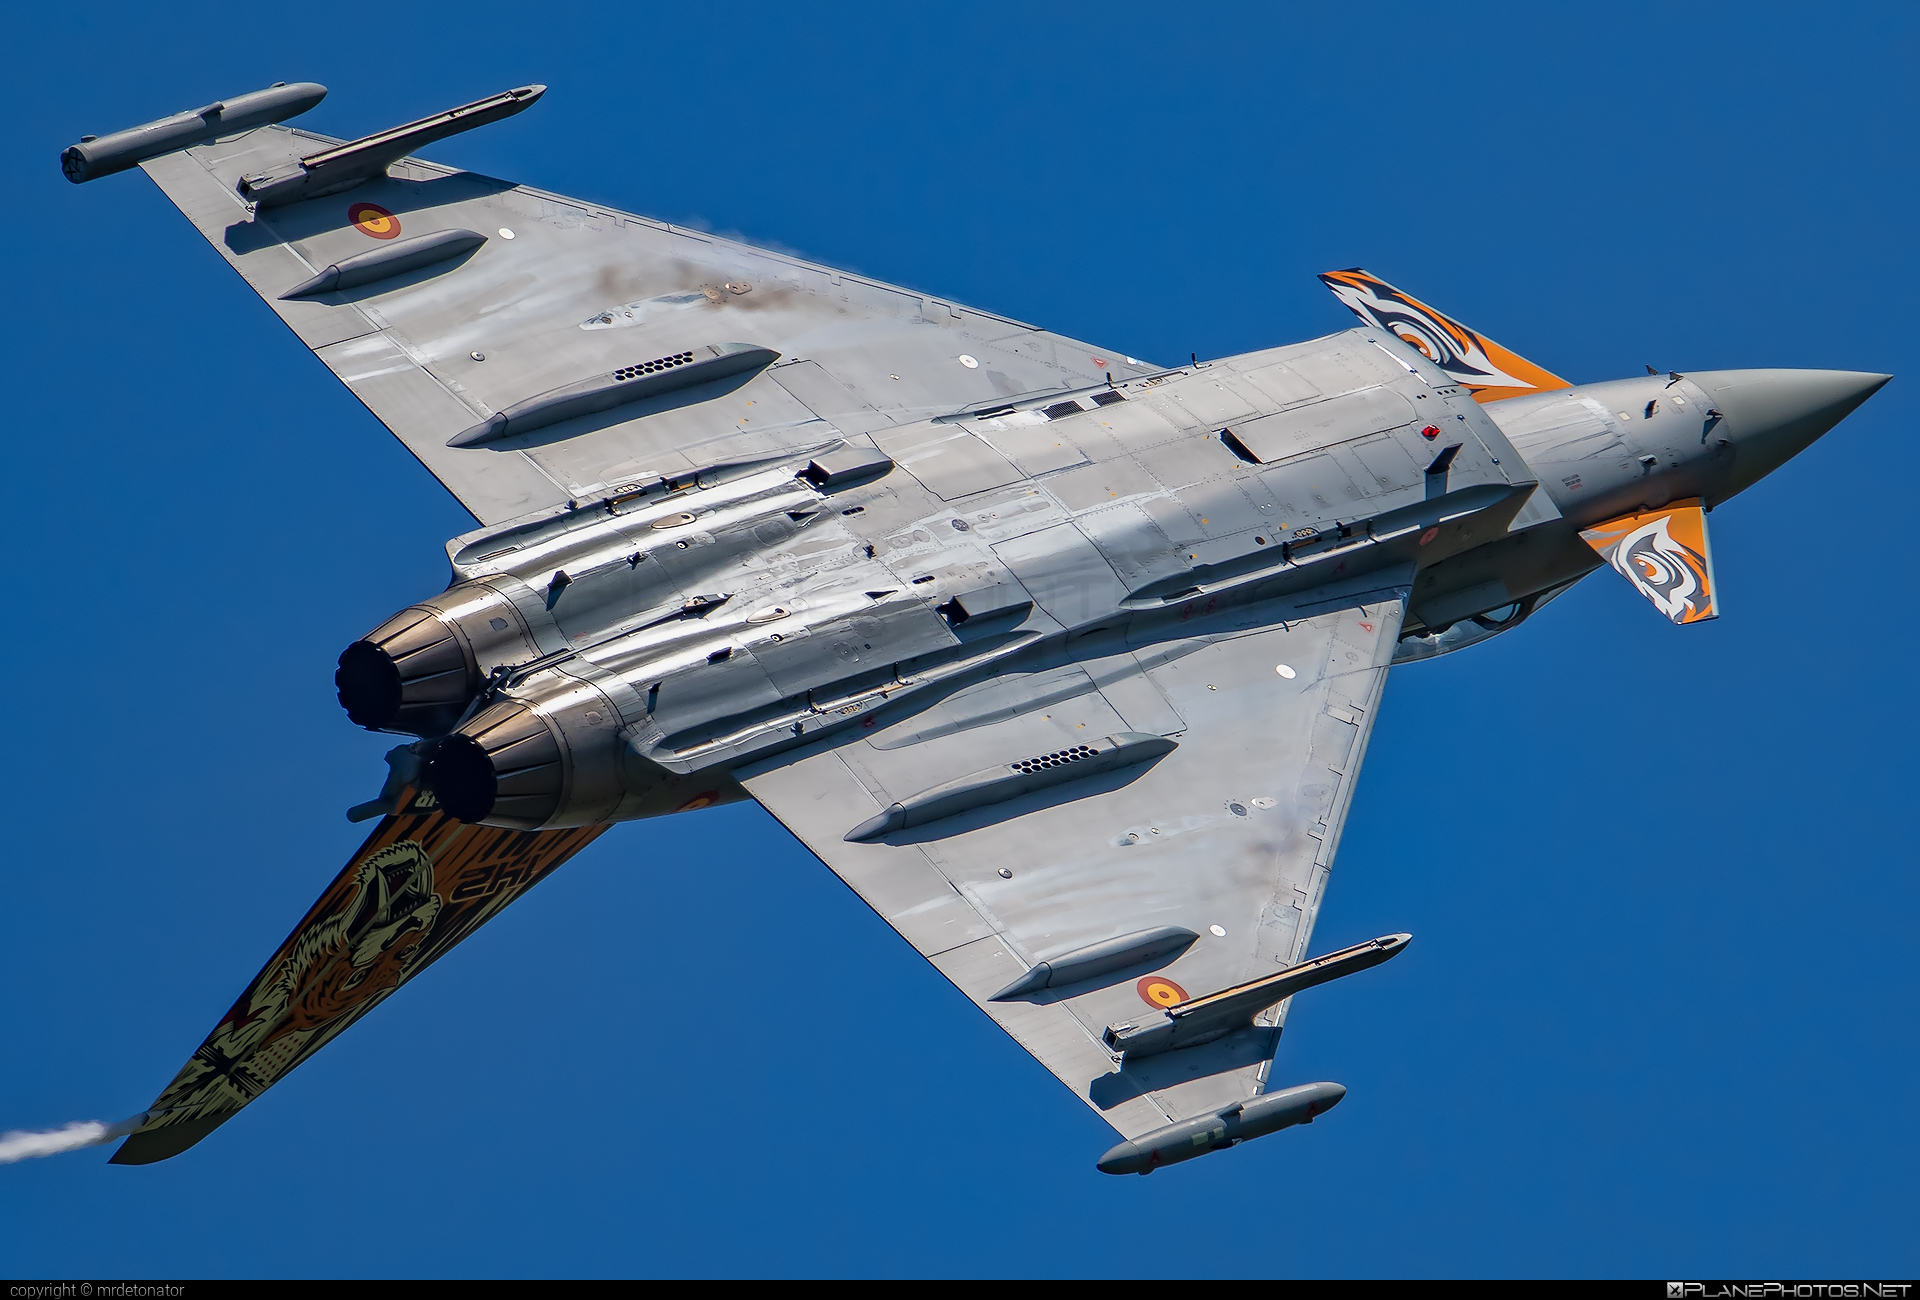 Eurofighter Typhoon S - C.16-73 operated by Ejército del Aire (Spanish Air Force) #ef2000 #ejercitoDelAire #eurofighter #eurofightertyphoon #natodays2018 #spanishAirForce #typhoon #typhoons